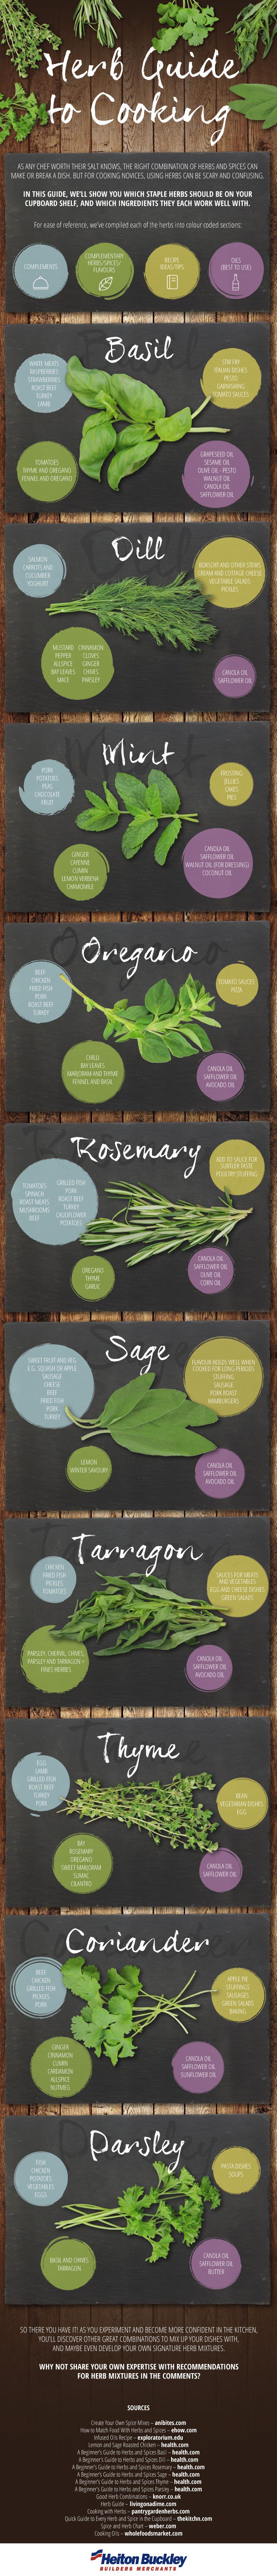 Herb-Guide-to-Cooking